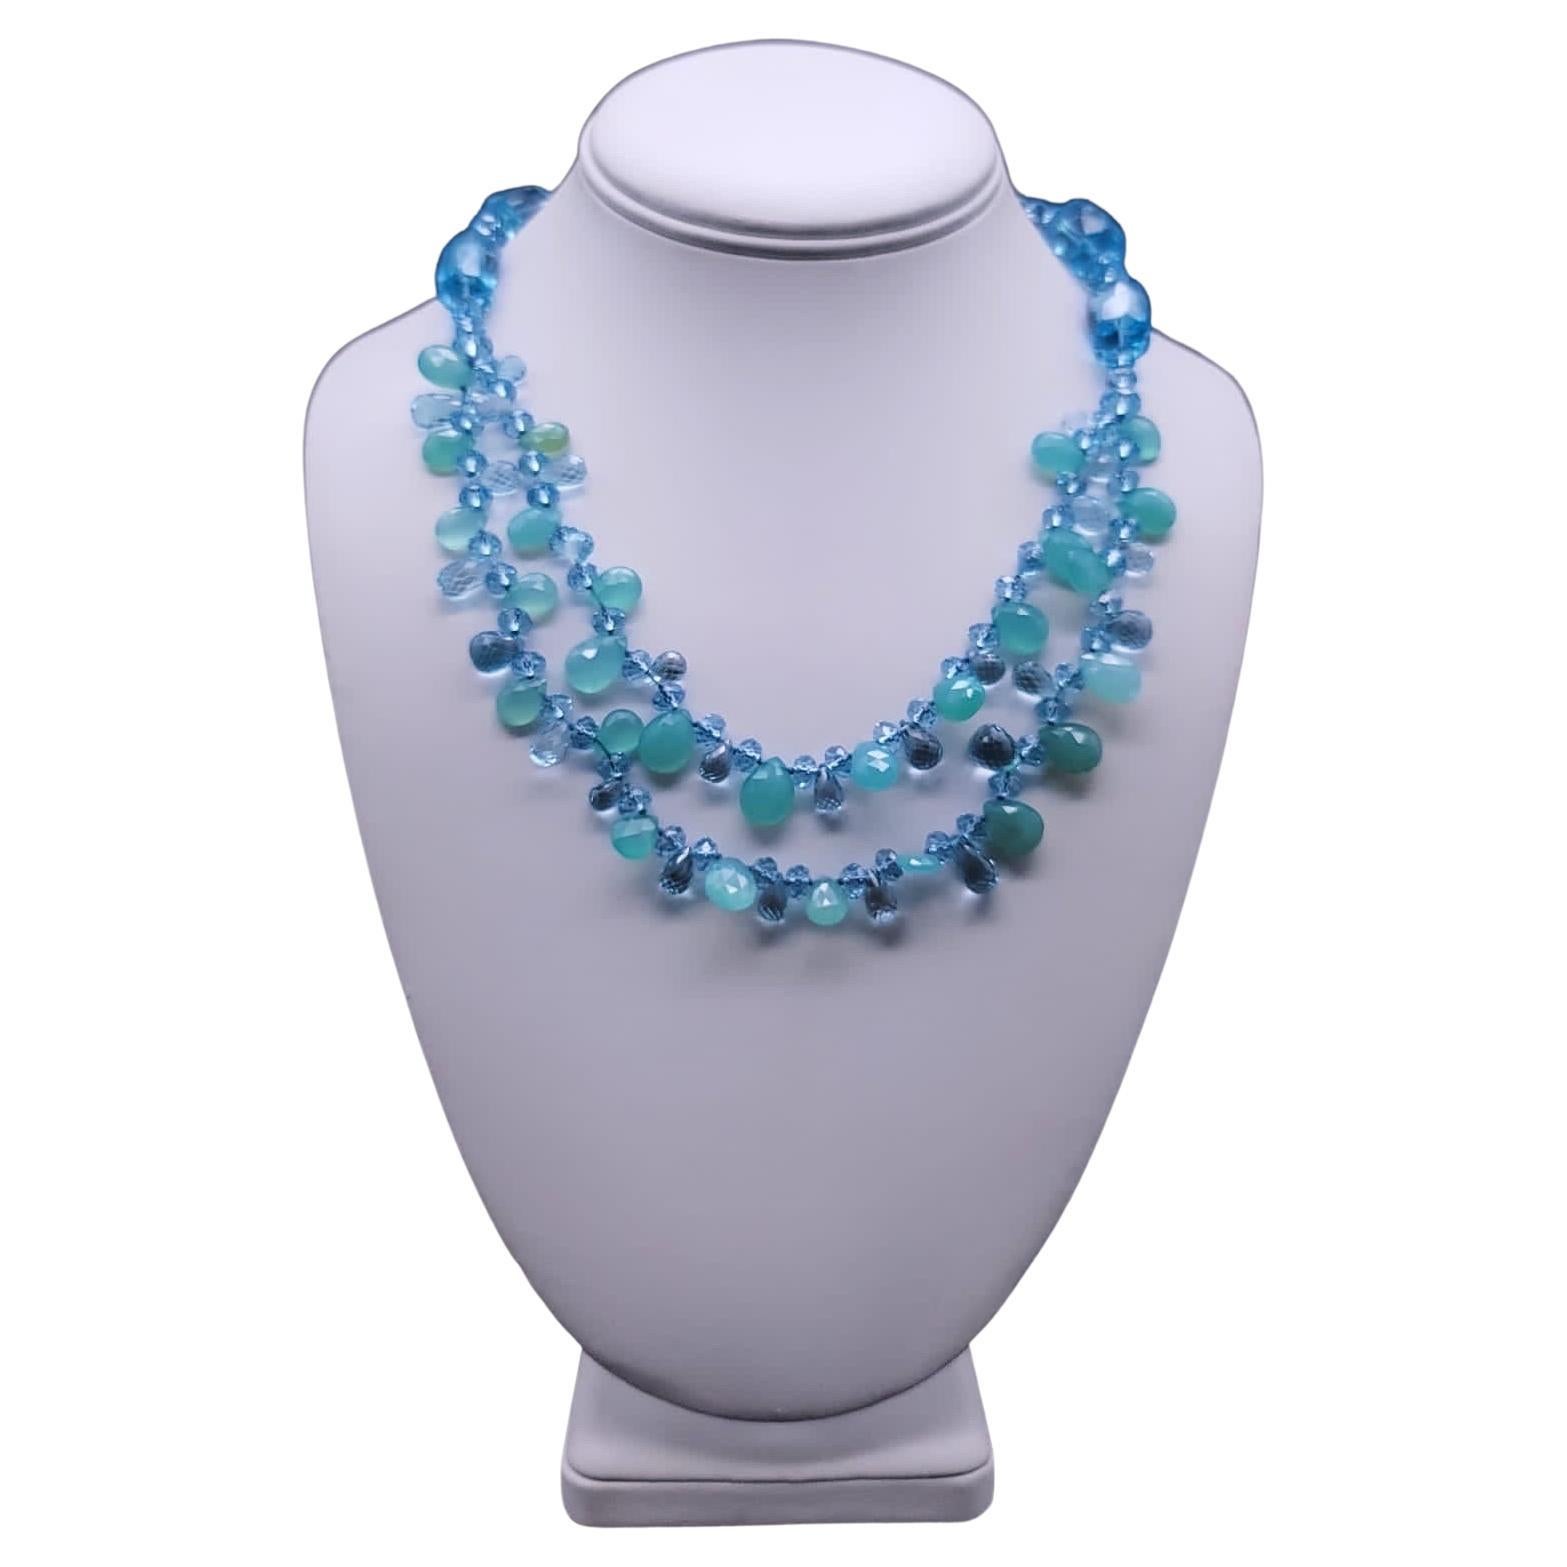 One-of-a-Kind

A blue topaz necklace with 2 strands to the collar bone and a single strand under the collar. The rich blue topaz, cut, faceted, and tear-dropped is accented by a green-blue chalcedony blending softly with the blue topaz. The clasp is